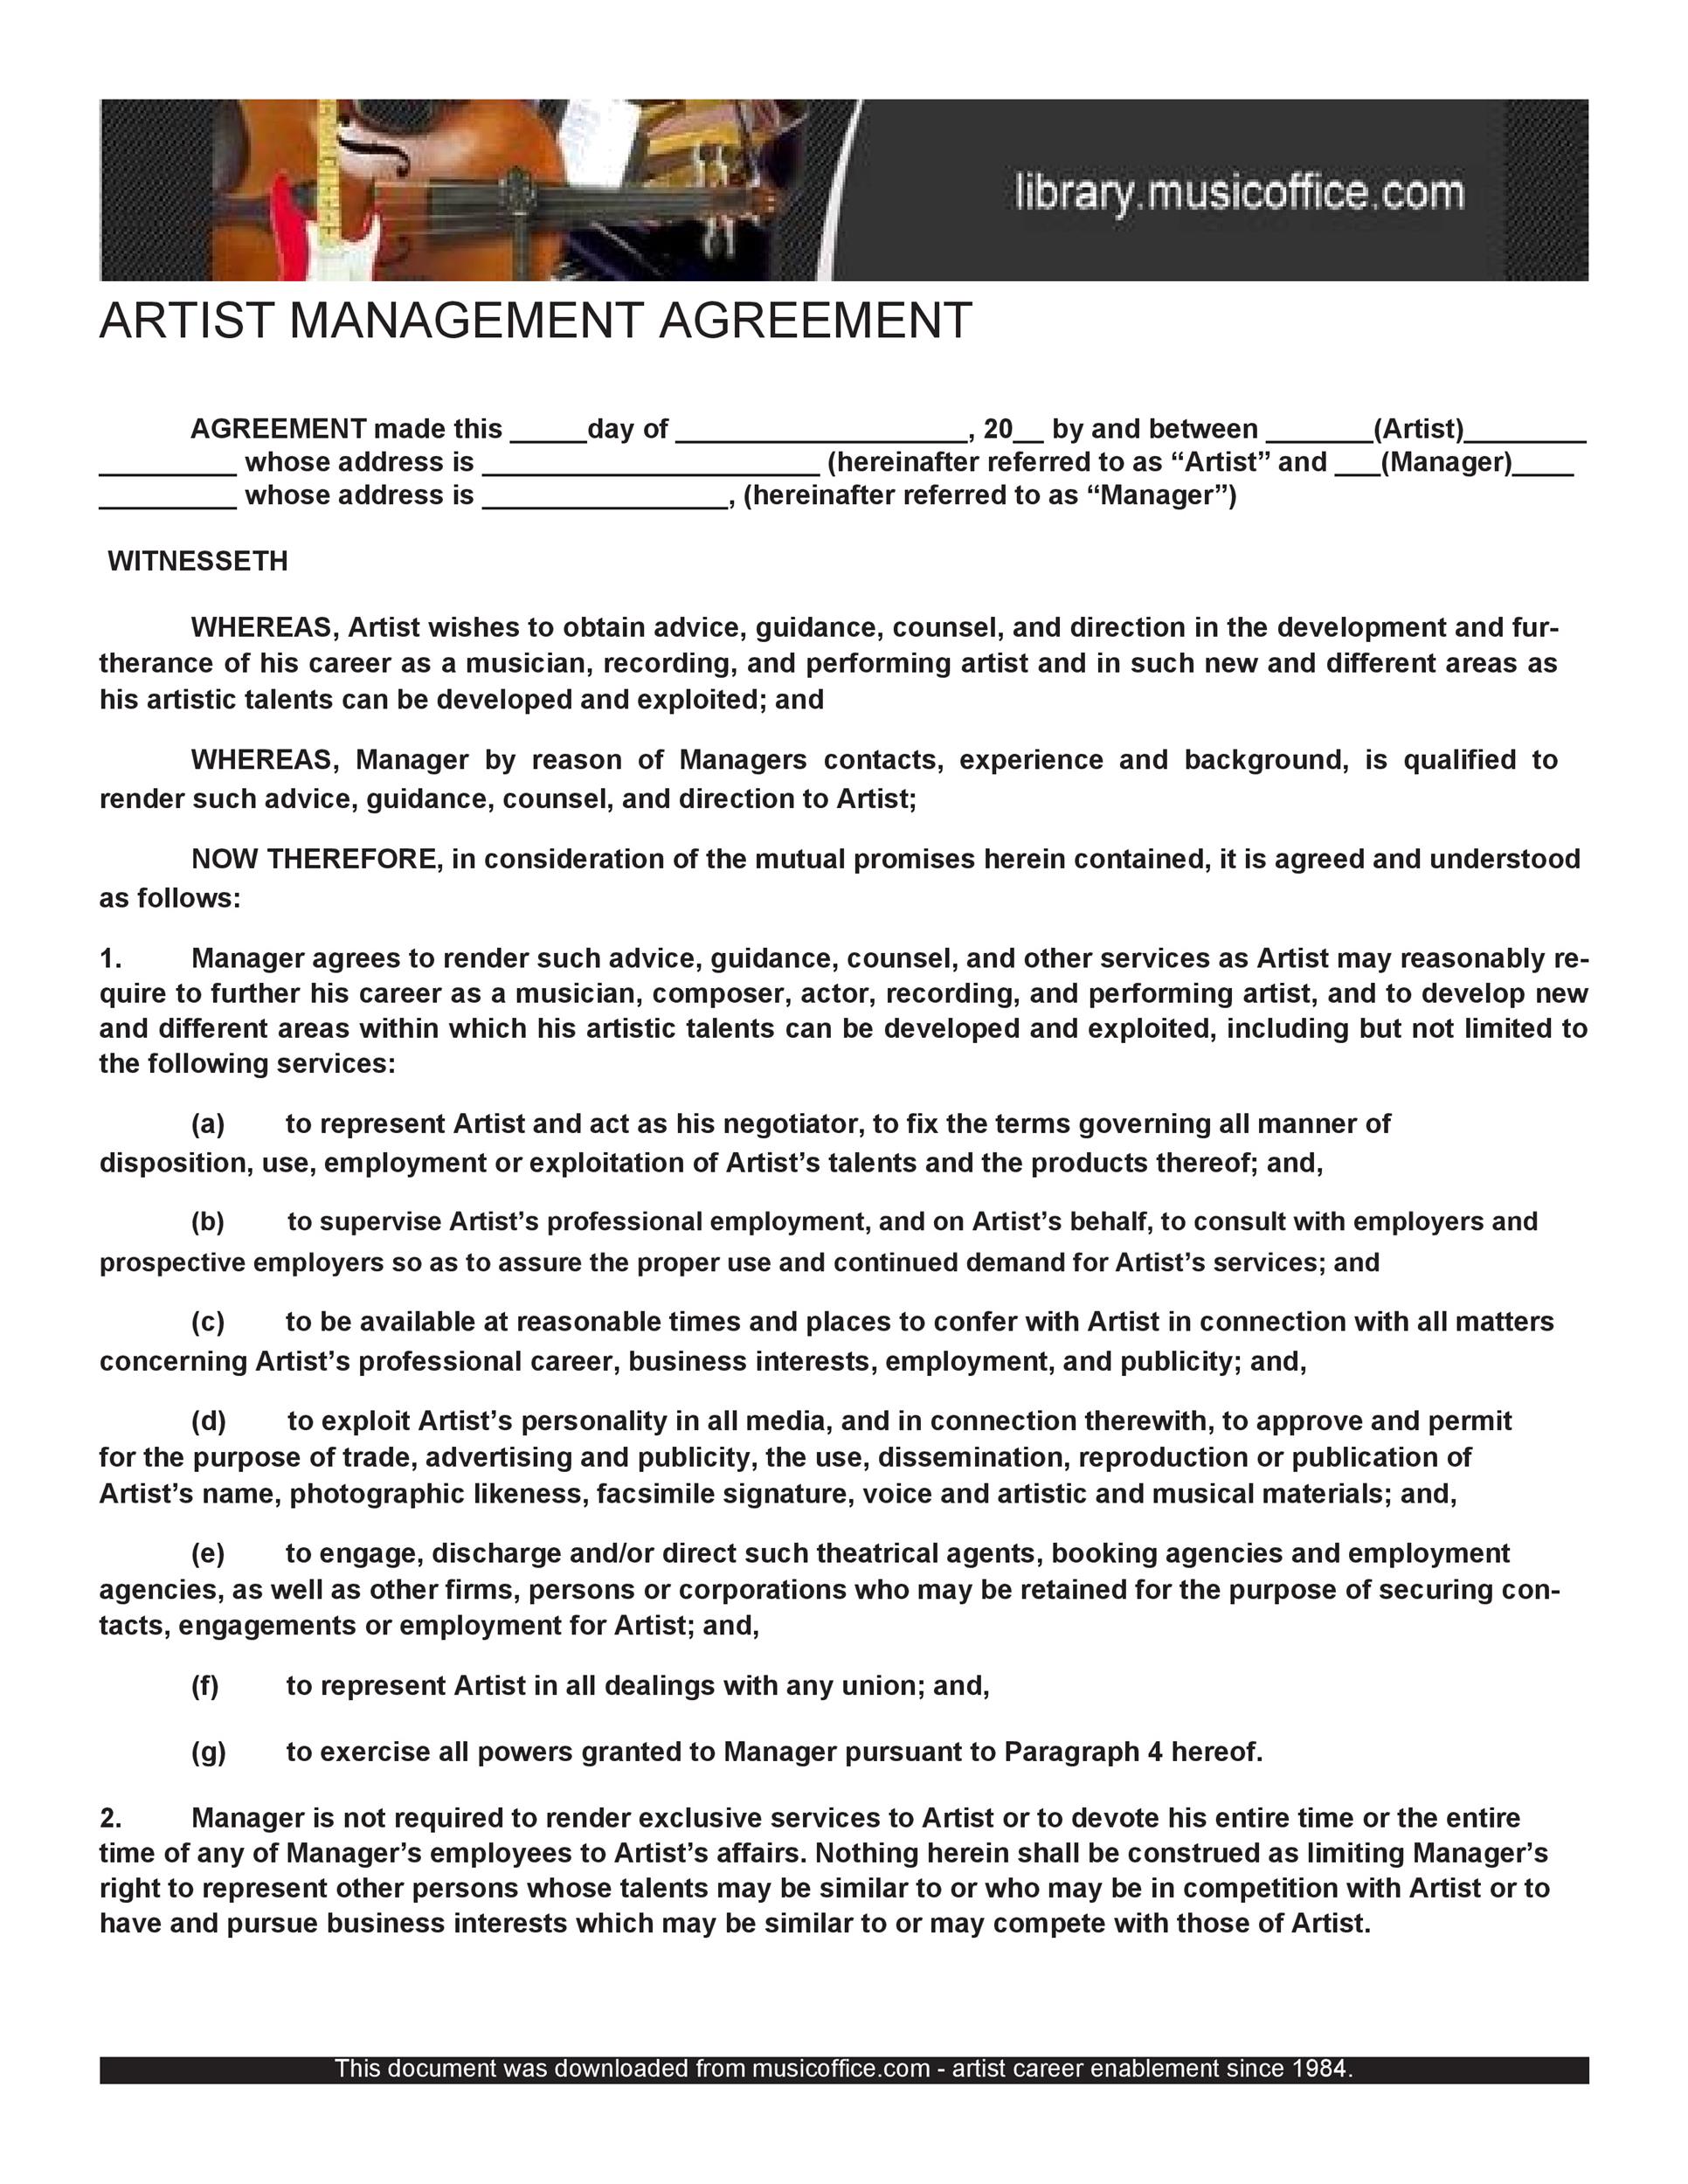 50 Artist Management Contract Templates (MS Word) ᐅ TemplateLab